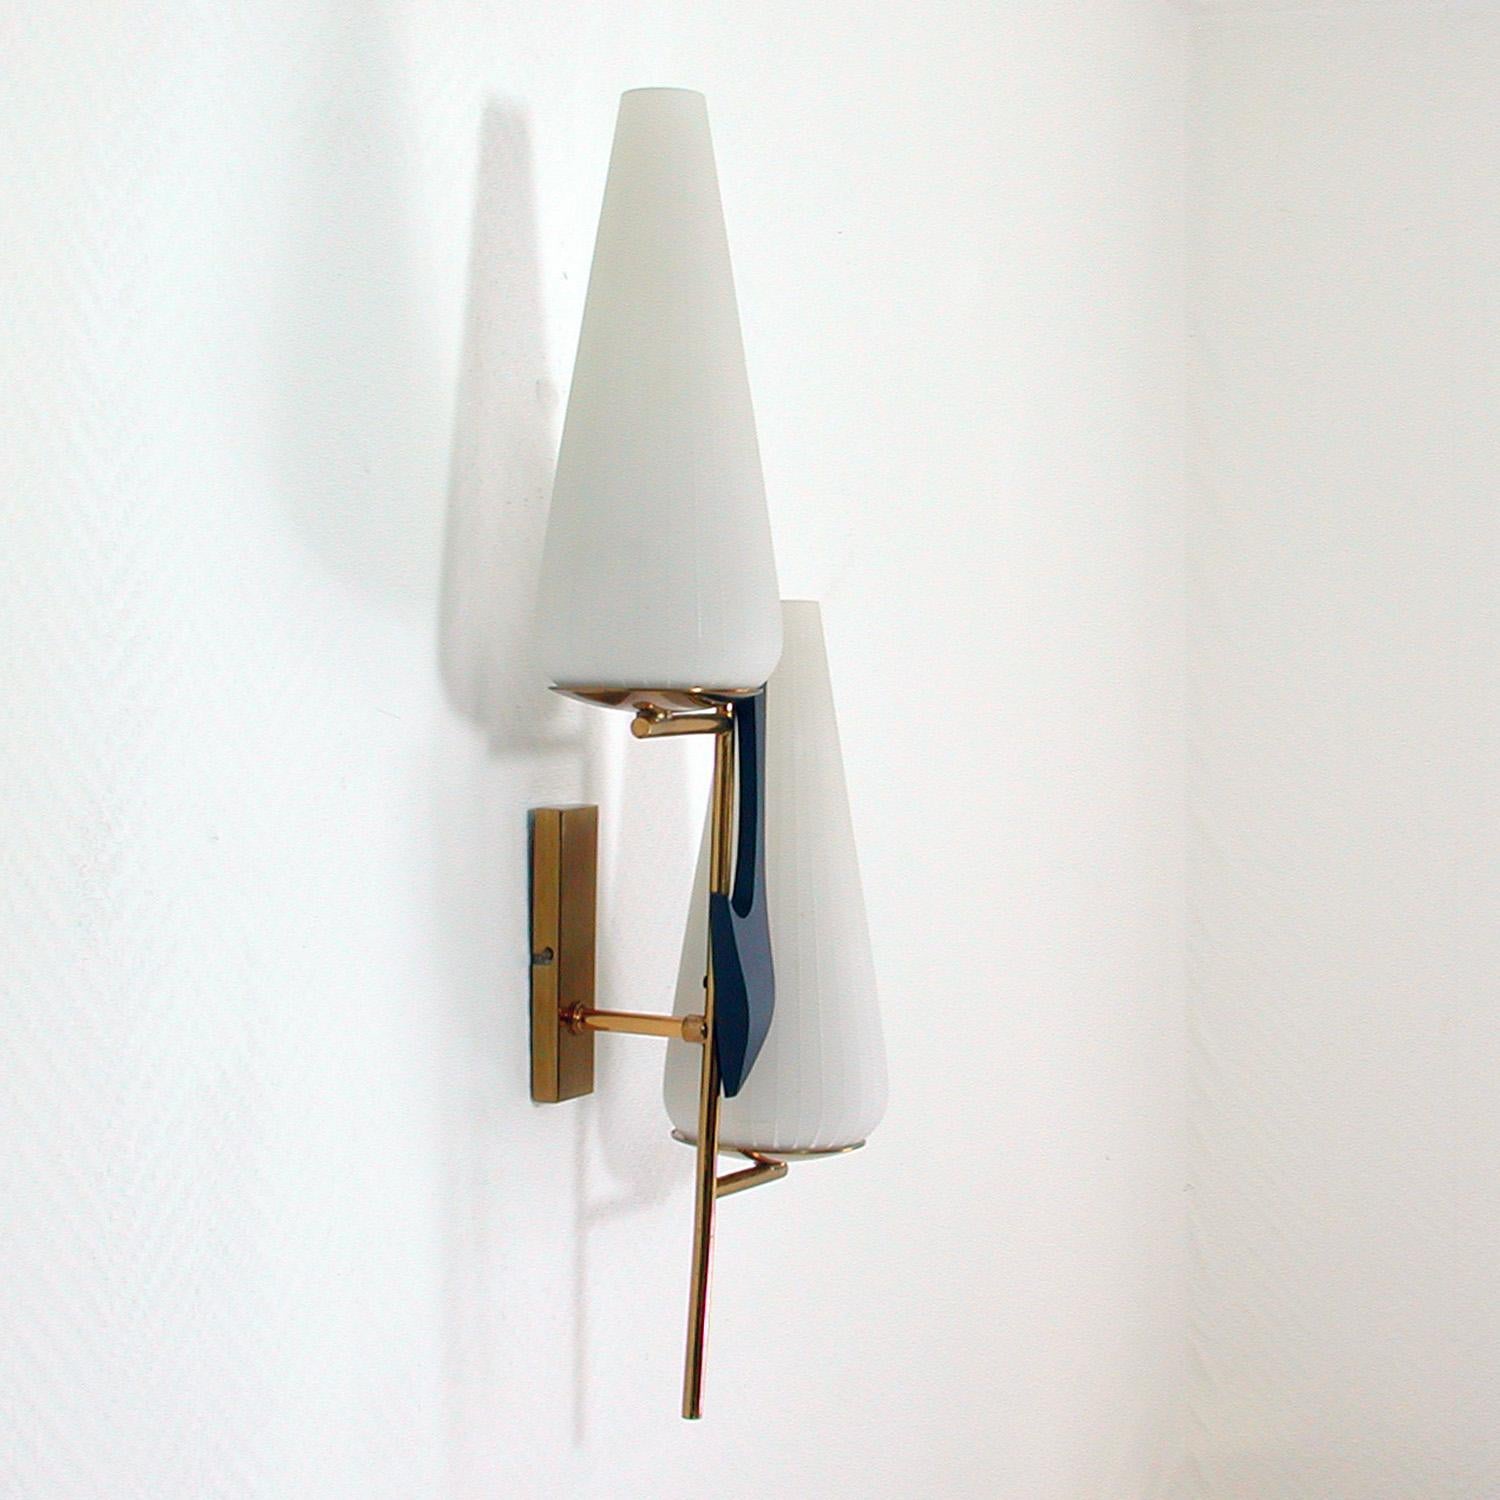 Lacquered Midcentury French Brass and Opaline Glass Sconce by Maison Arlus, 1950s